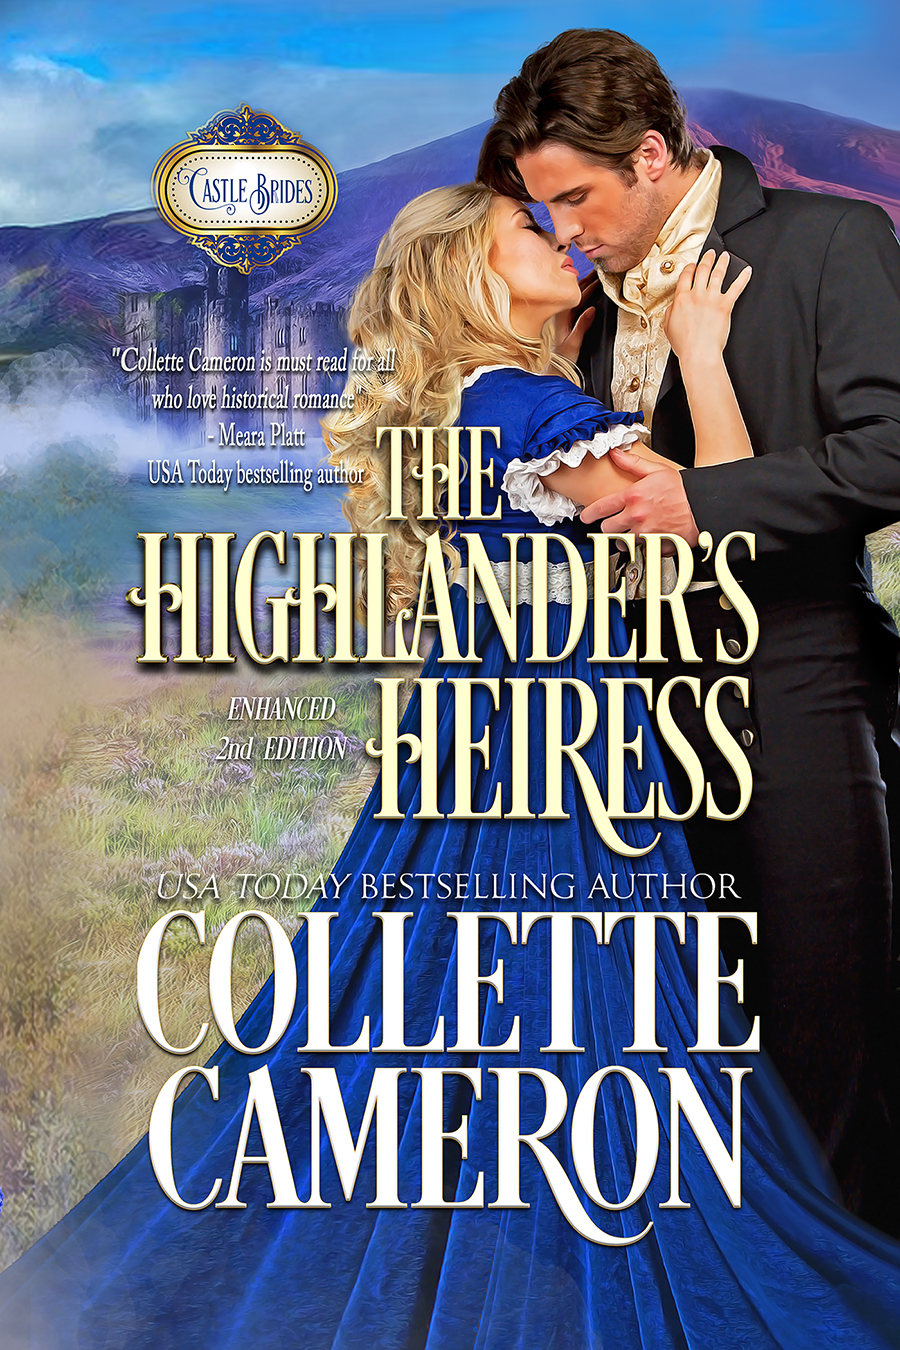 Highlander's Hope, USA Today Bestselling Author Collette Cameron, Collette Cameron historical romances, Collette Cameron Regency romances, Collette Cameron romance novels, Collette Cameron Scottish historical romance books, Blue Rose Romance, Bestselling historical romance authors, historical romance novels, Regency romance novels, Highlander romance books, Scottish romance novels, romance novel covers, Bestselling romance novels, Bestselling Regency romances, Bestselling Scottish Romances, Bestselling Highlander romances, Victorian Romances, lords and ladies romance novels, Regency England Dukes romance books, aristocrats and royalty, happily ever after novels, love stories, wallflowers, rakes and rogues, award-winning books, Award-winning author, historical romance audio books, collettecameron.com, The Regency Rose Newsletter, Sweet-to-Spicy Timeless Romance, historical romance meme, romance meme, historical regency romance 